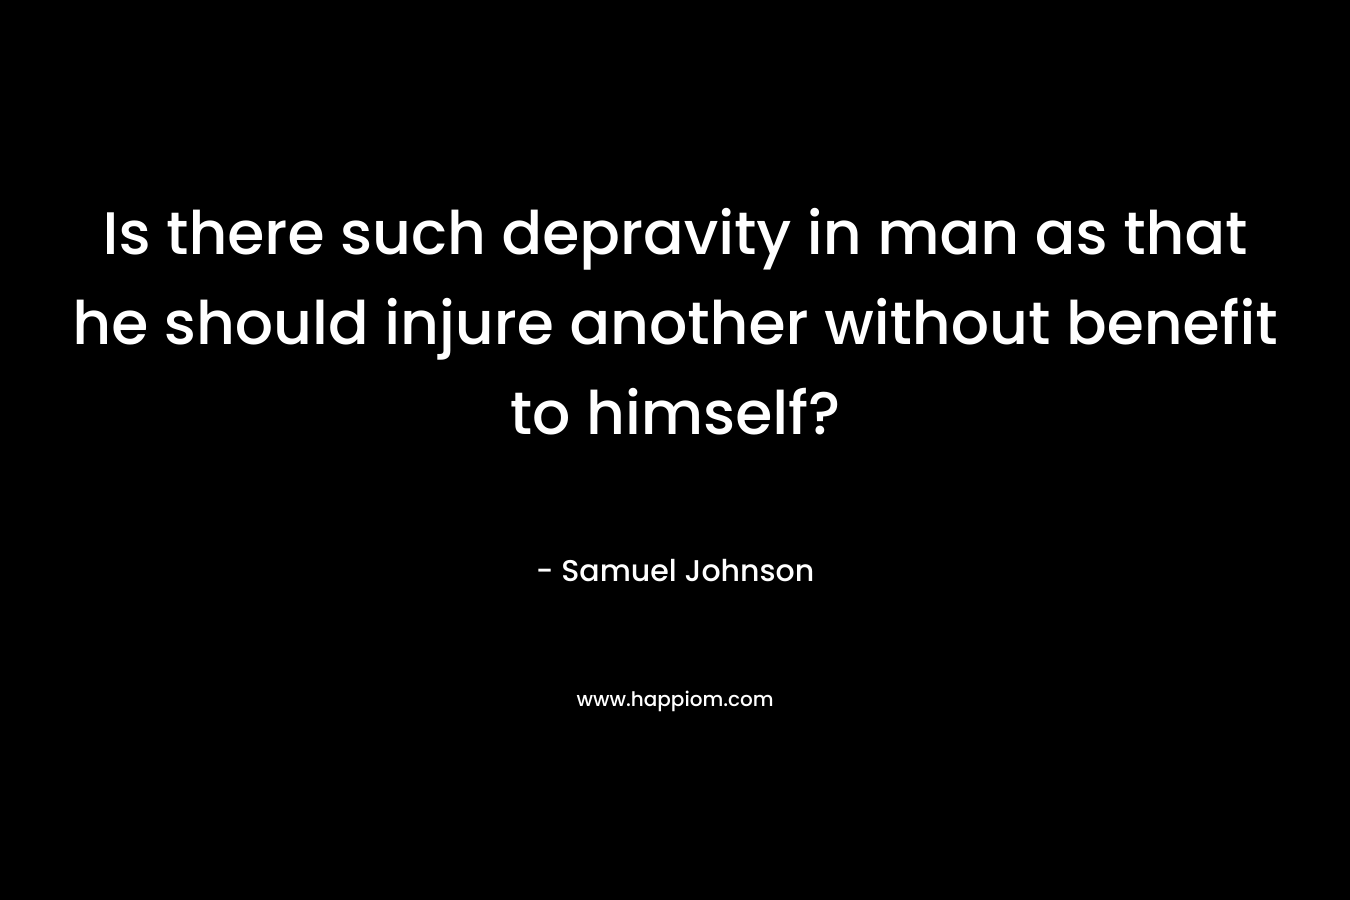 Is there such depravity in man as that he should injure another without benefit to himself? – Samuel Johnson